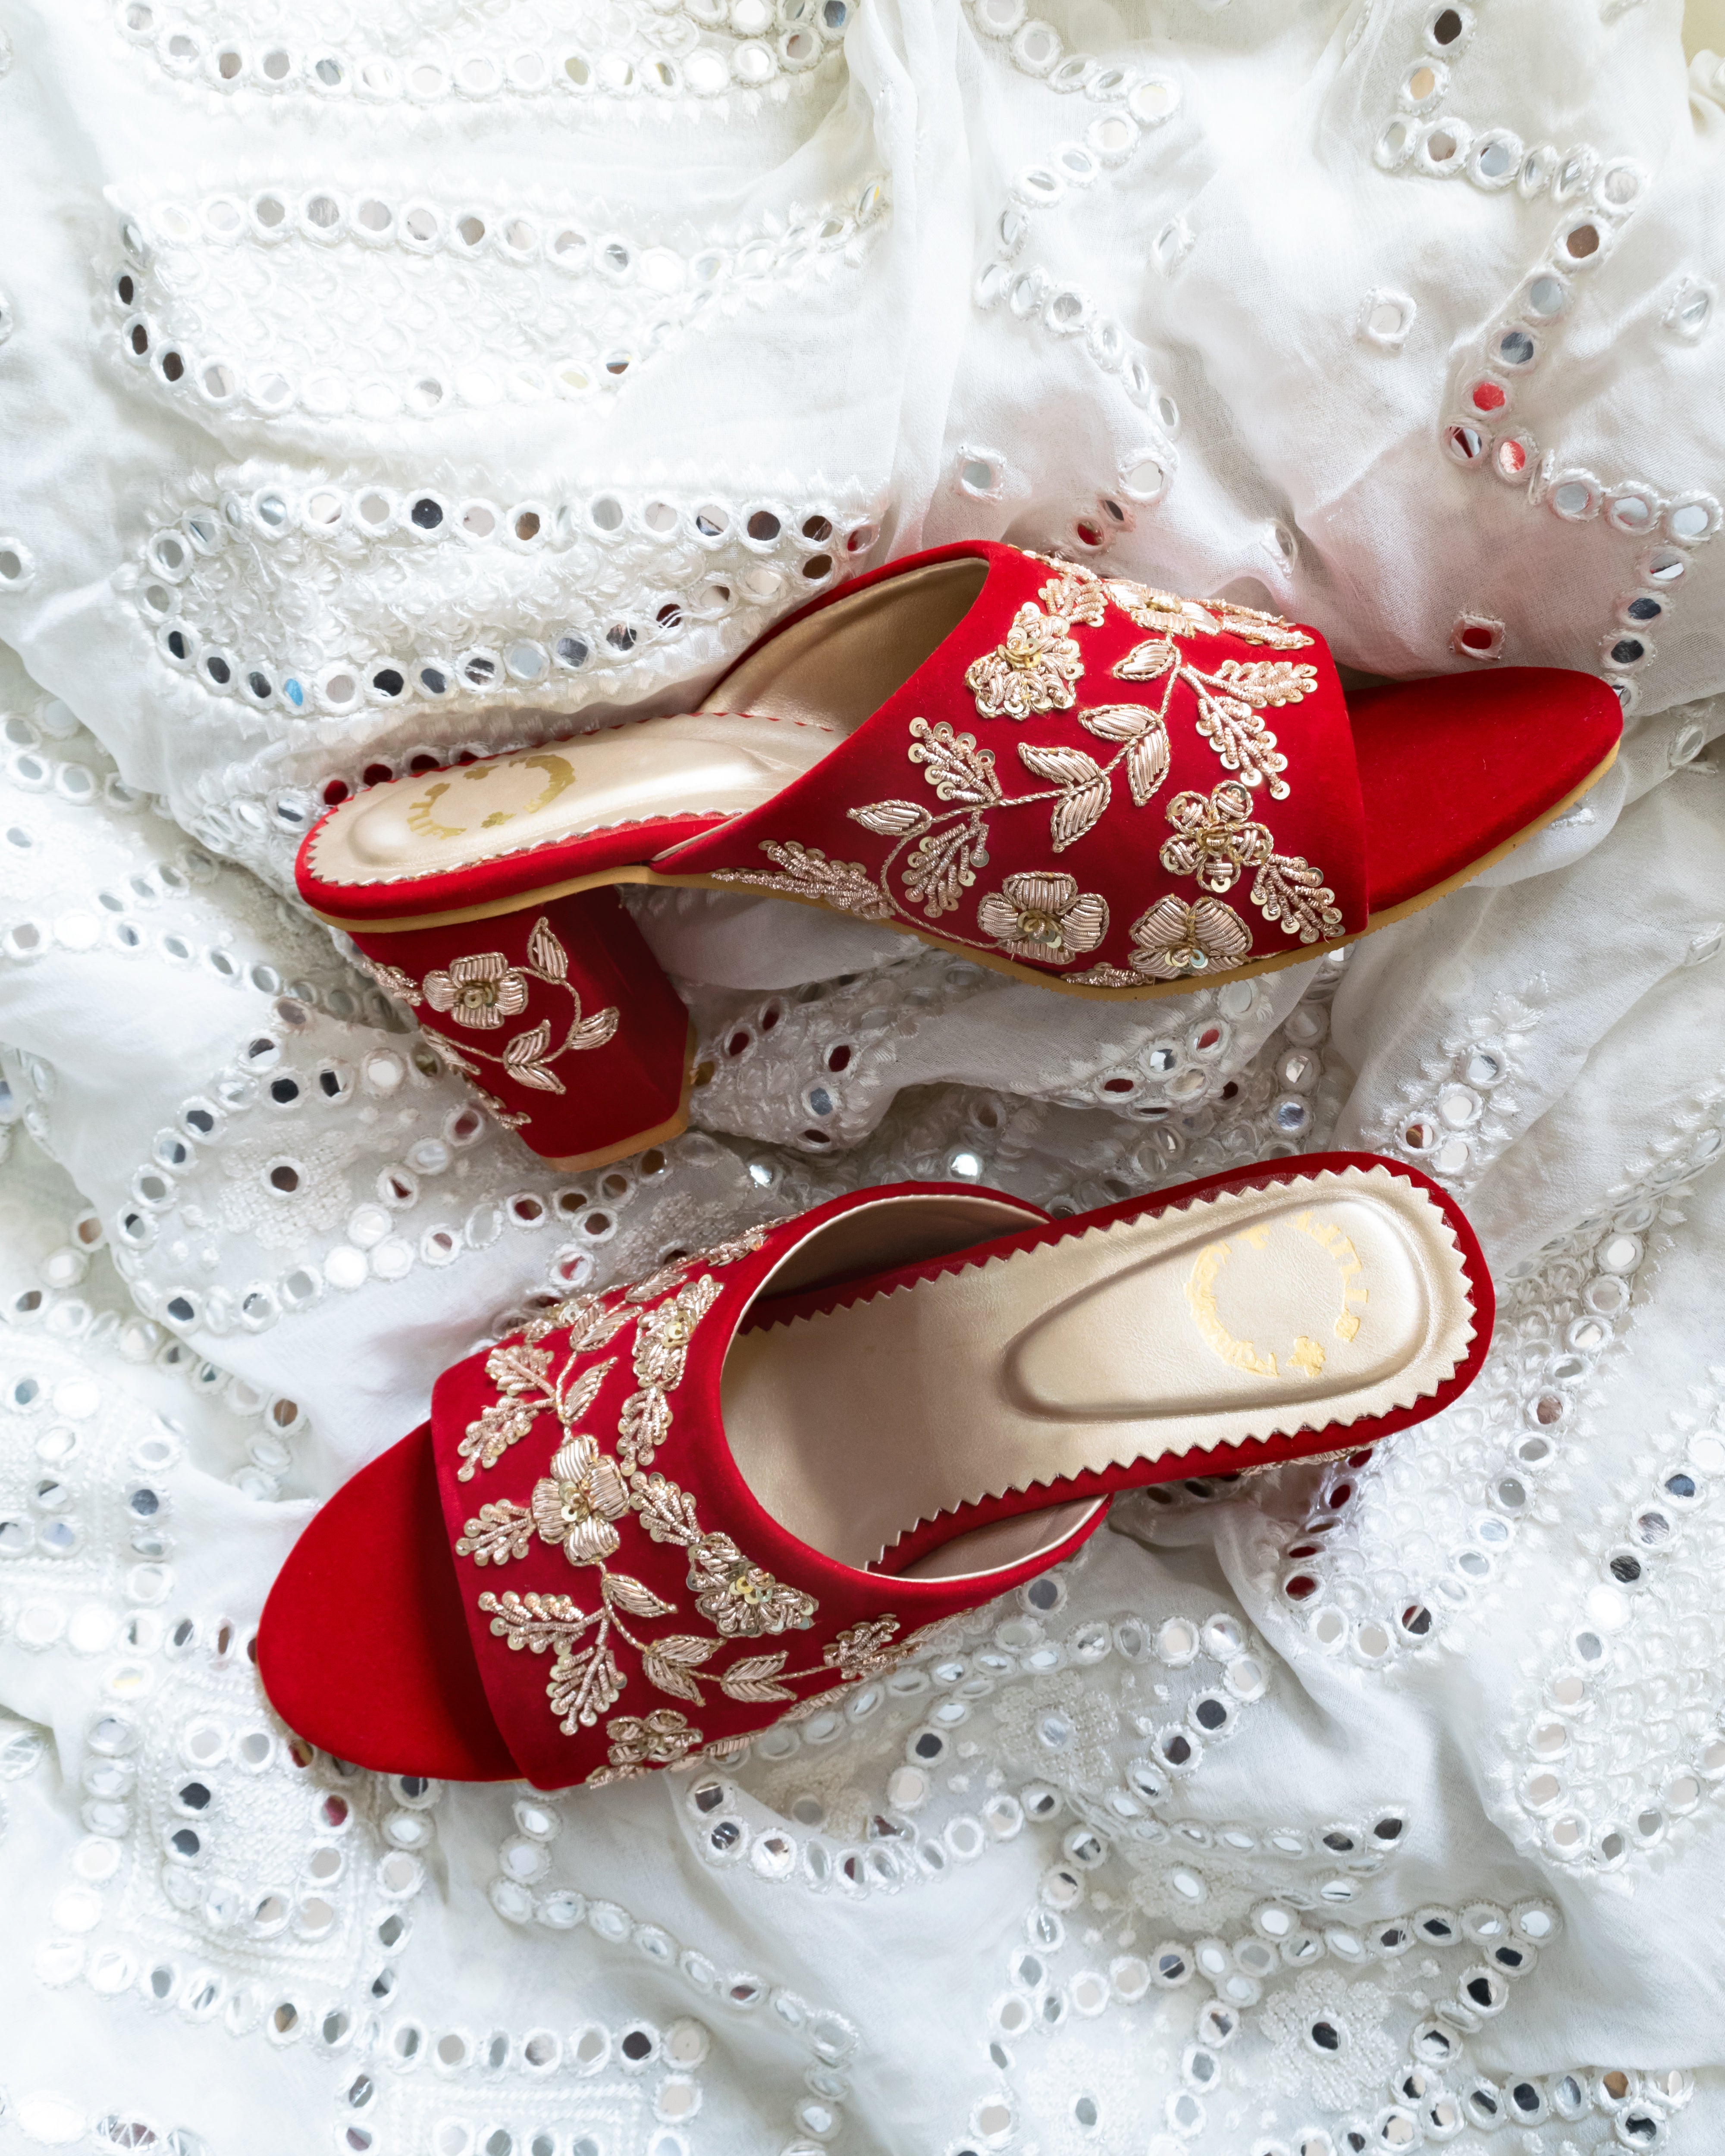 Weeding Shoes - Buy Wedding shoes online | Mochi Shoes